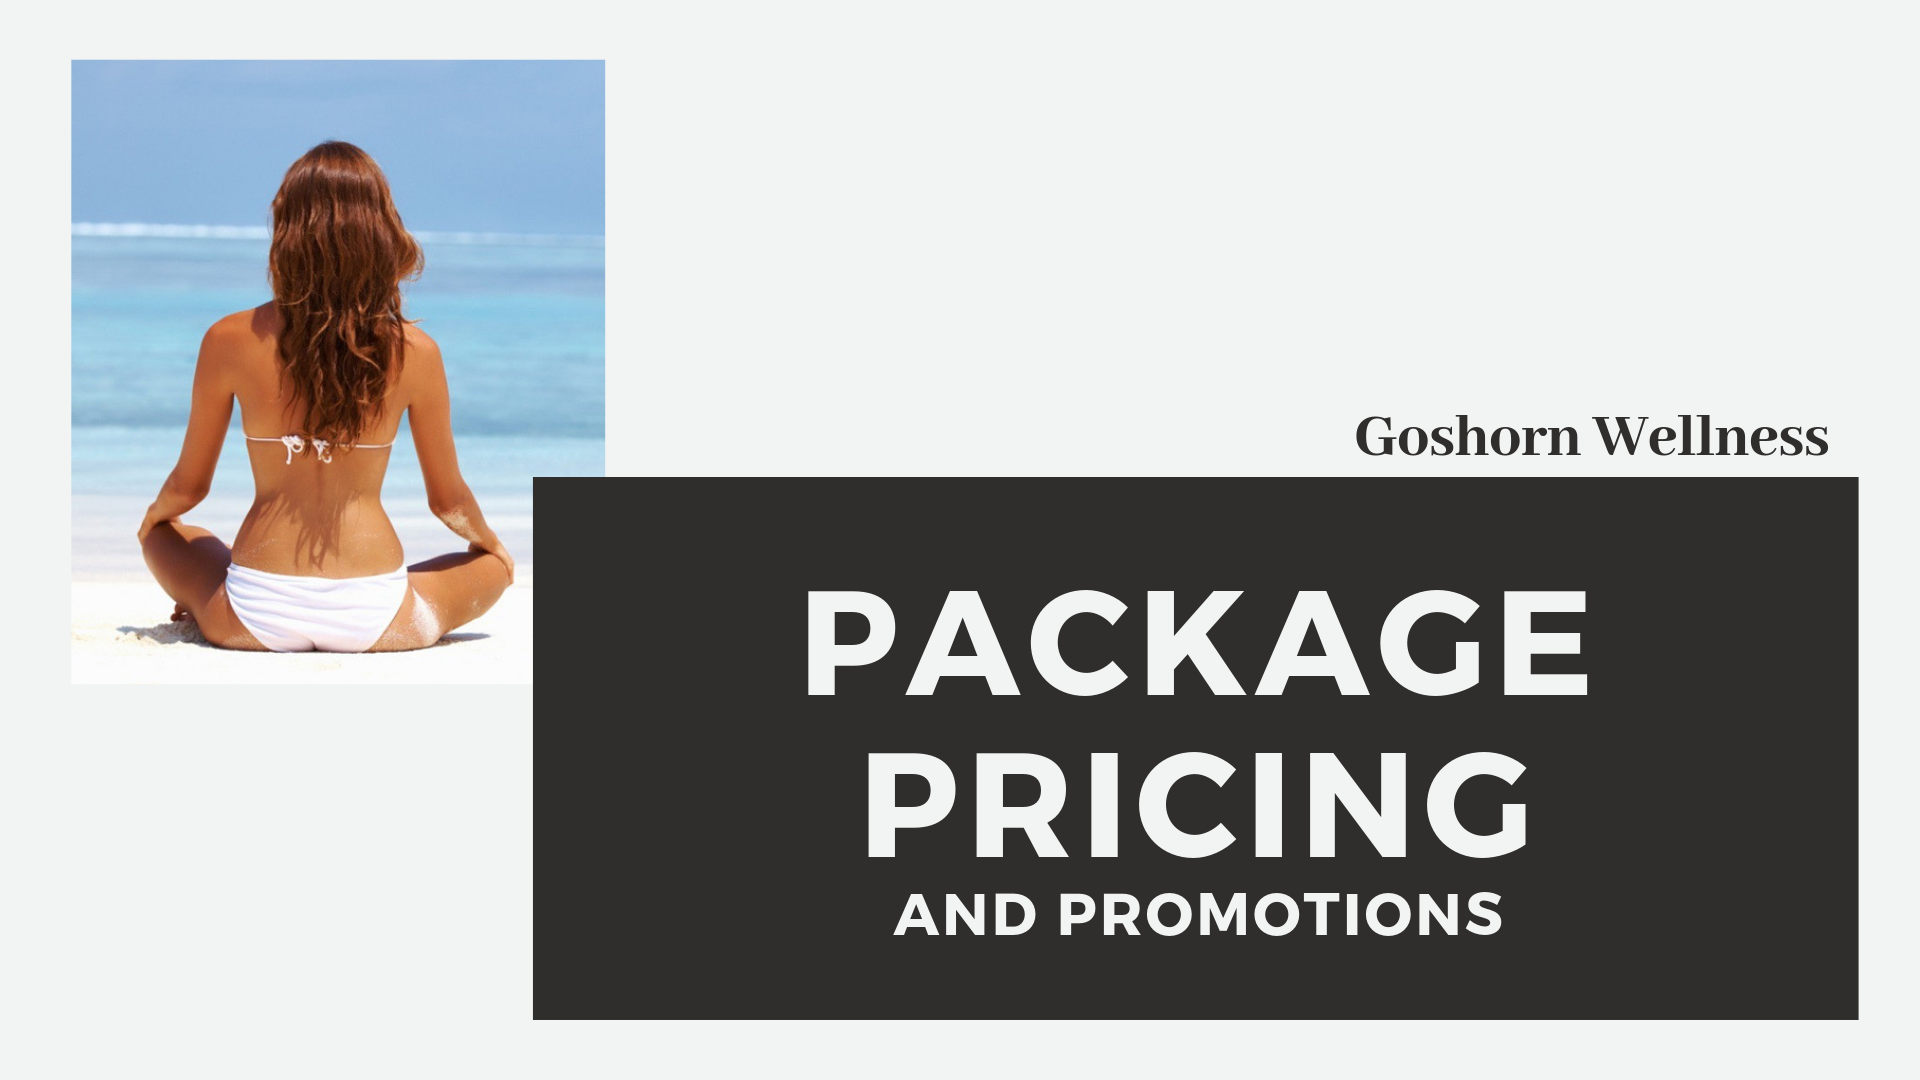 package pricing